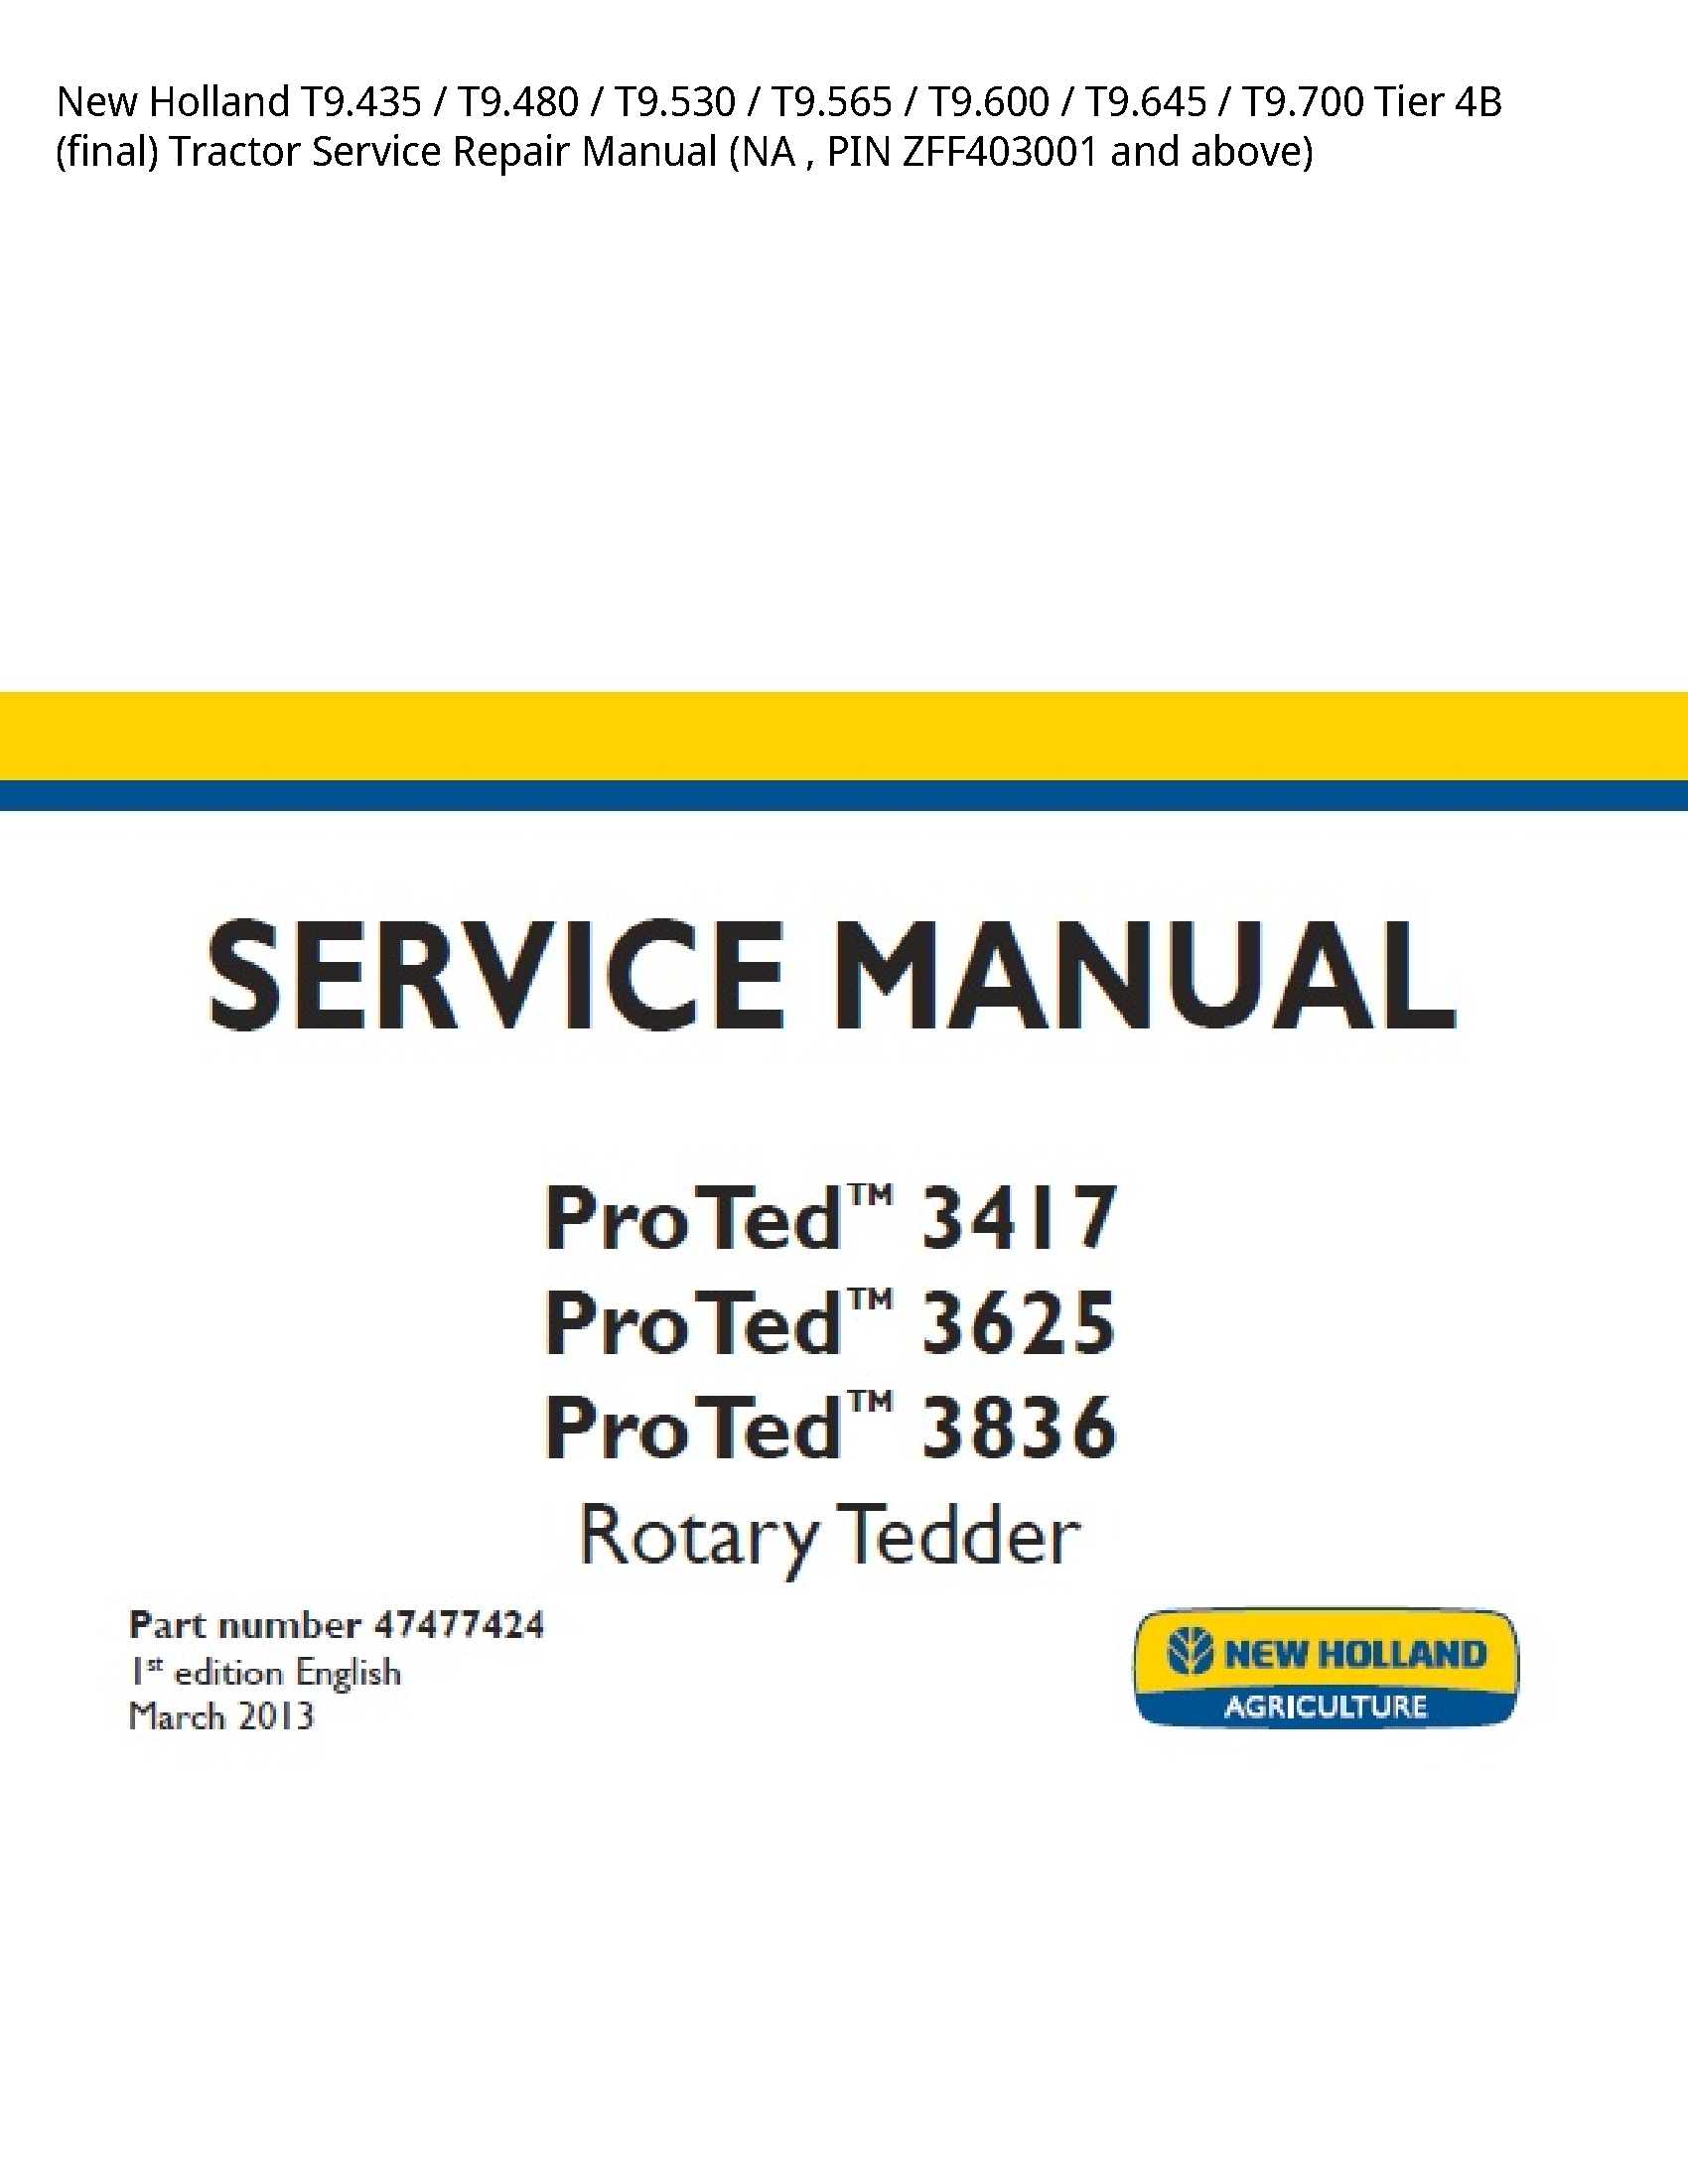 New Holland T9.435 Tier (final) Tractor manual